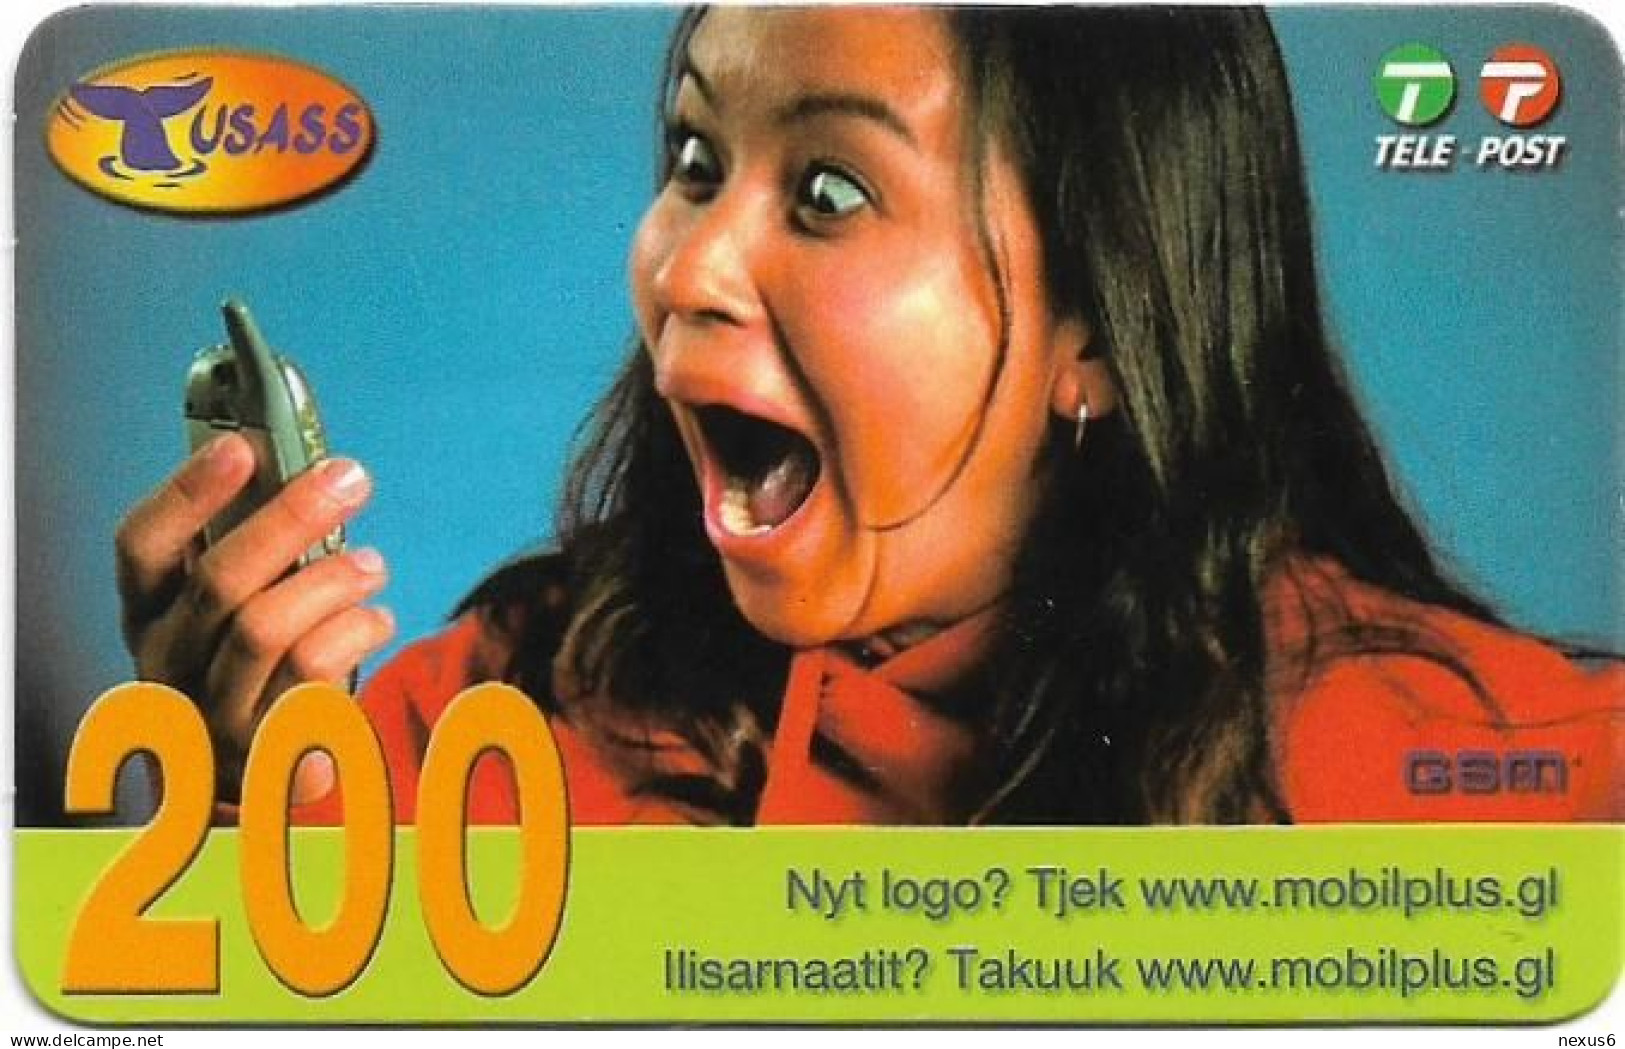 Greenland - Tusass - Girl With Mobile, GSM Refill, 200kr. Exp. 21.04.2007, Used - Grönland